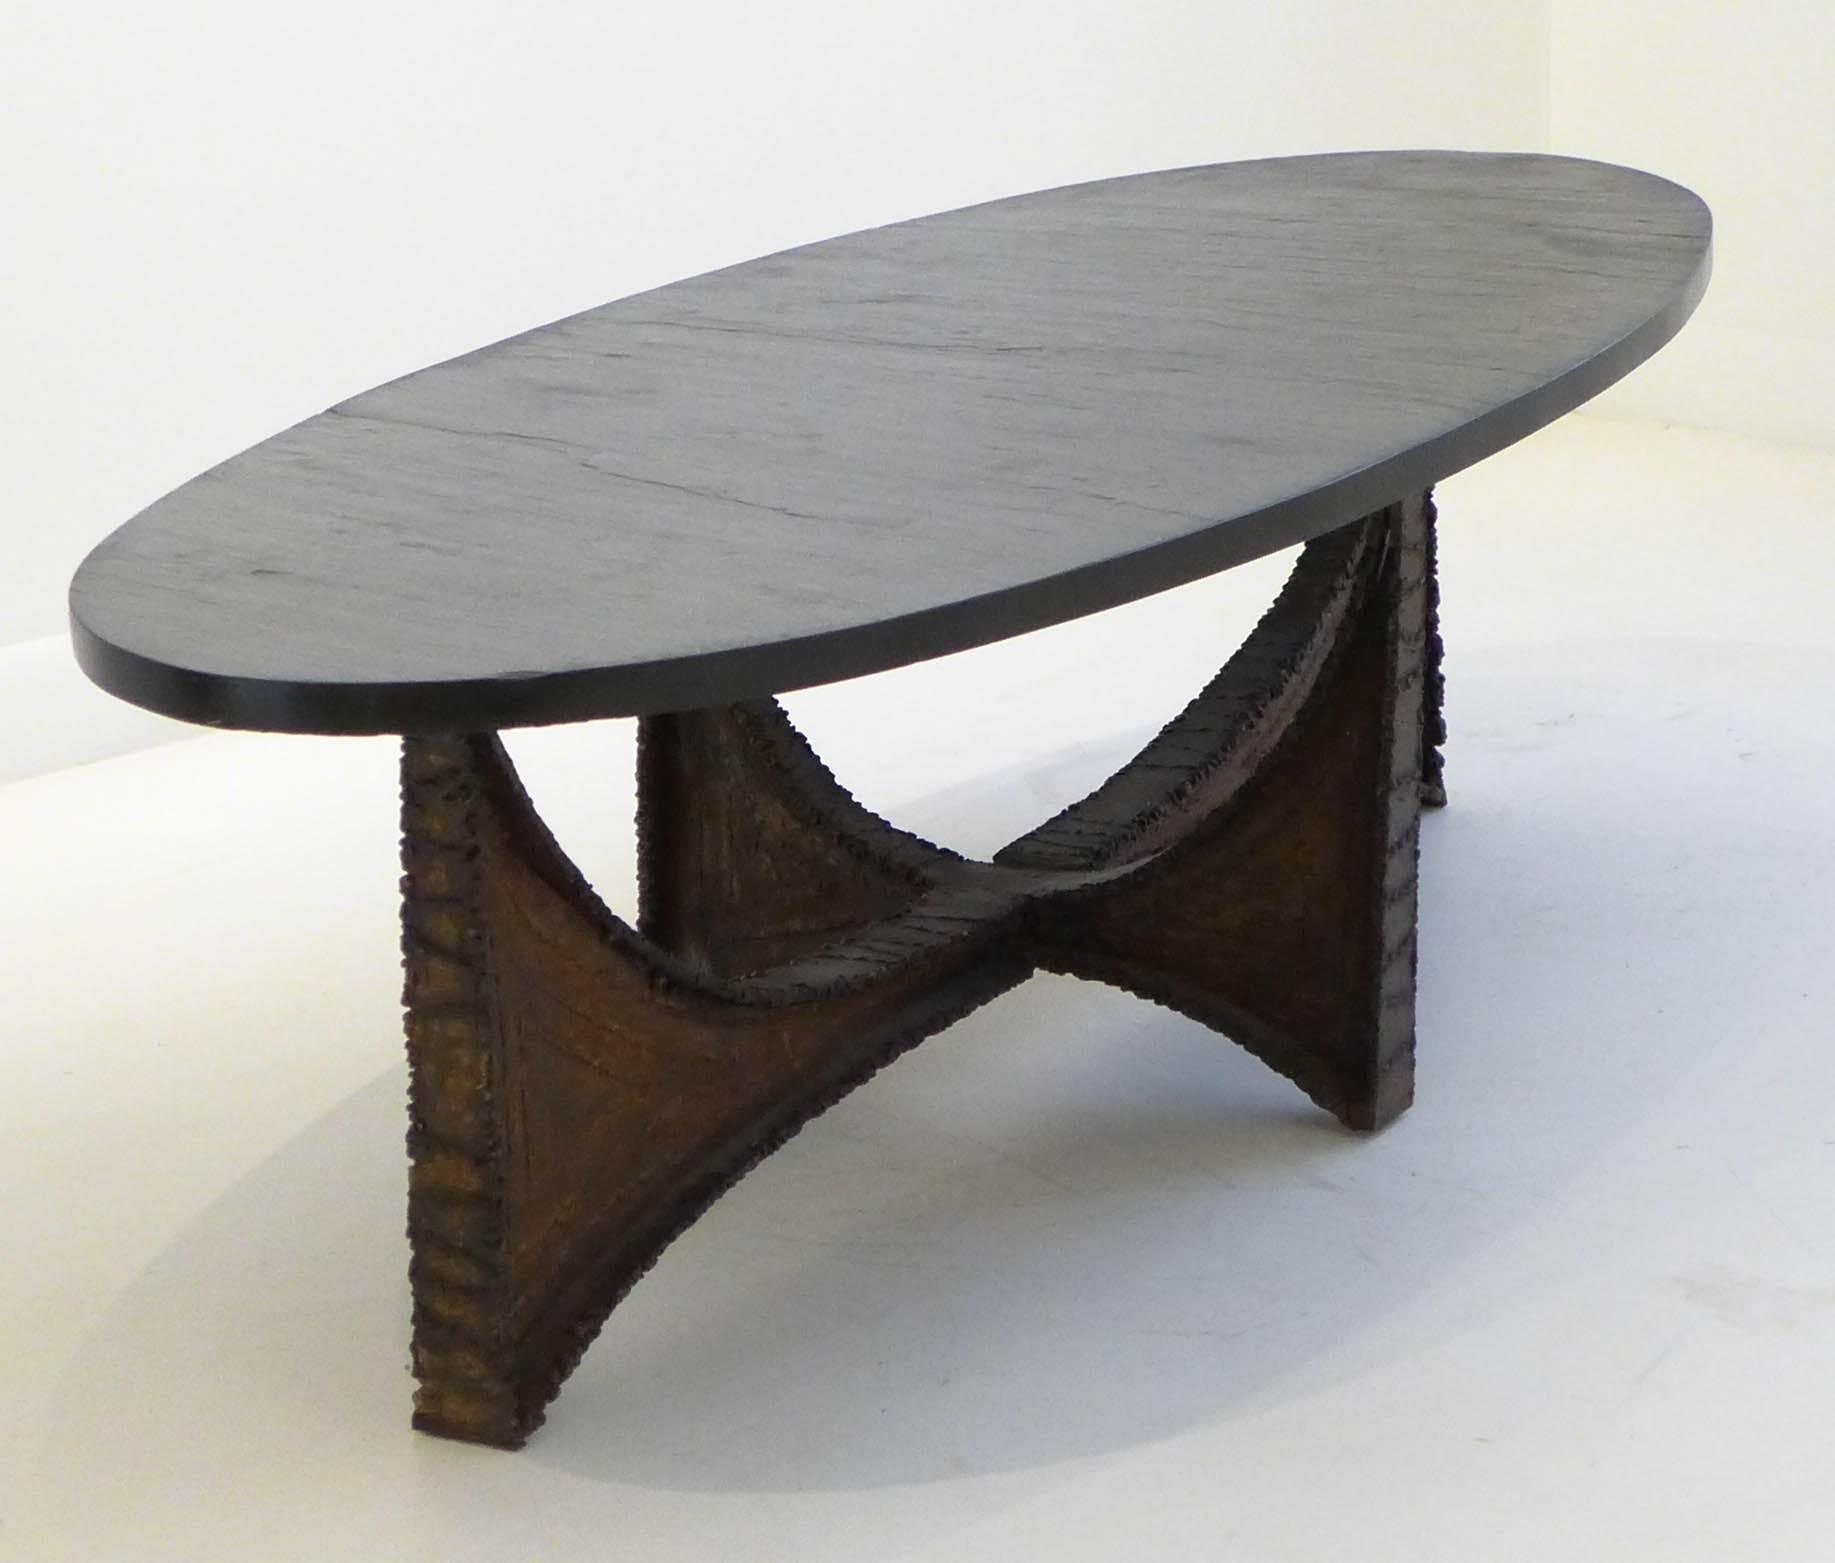 Brutalist cocktail table with a welded, patinated and cantilevered steel base and an oblong textured slate top. A rare Paul Evans design produced at the Paul Evans studio, c. 1970. Unmarked. For similar examples, see Wright, 24 June 2010 Lot 110 and